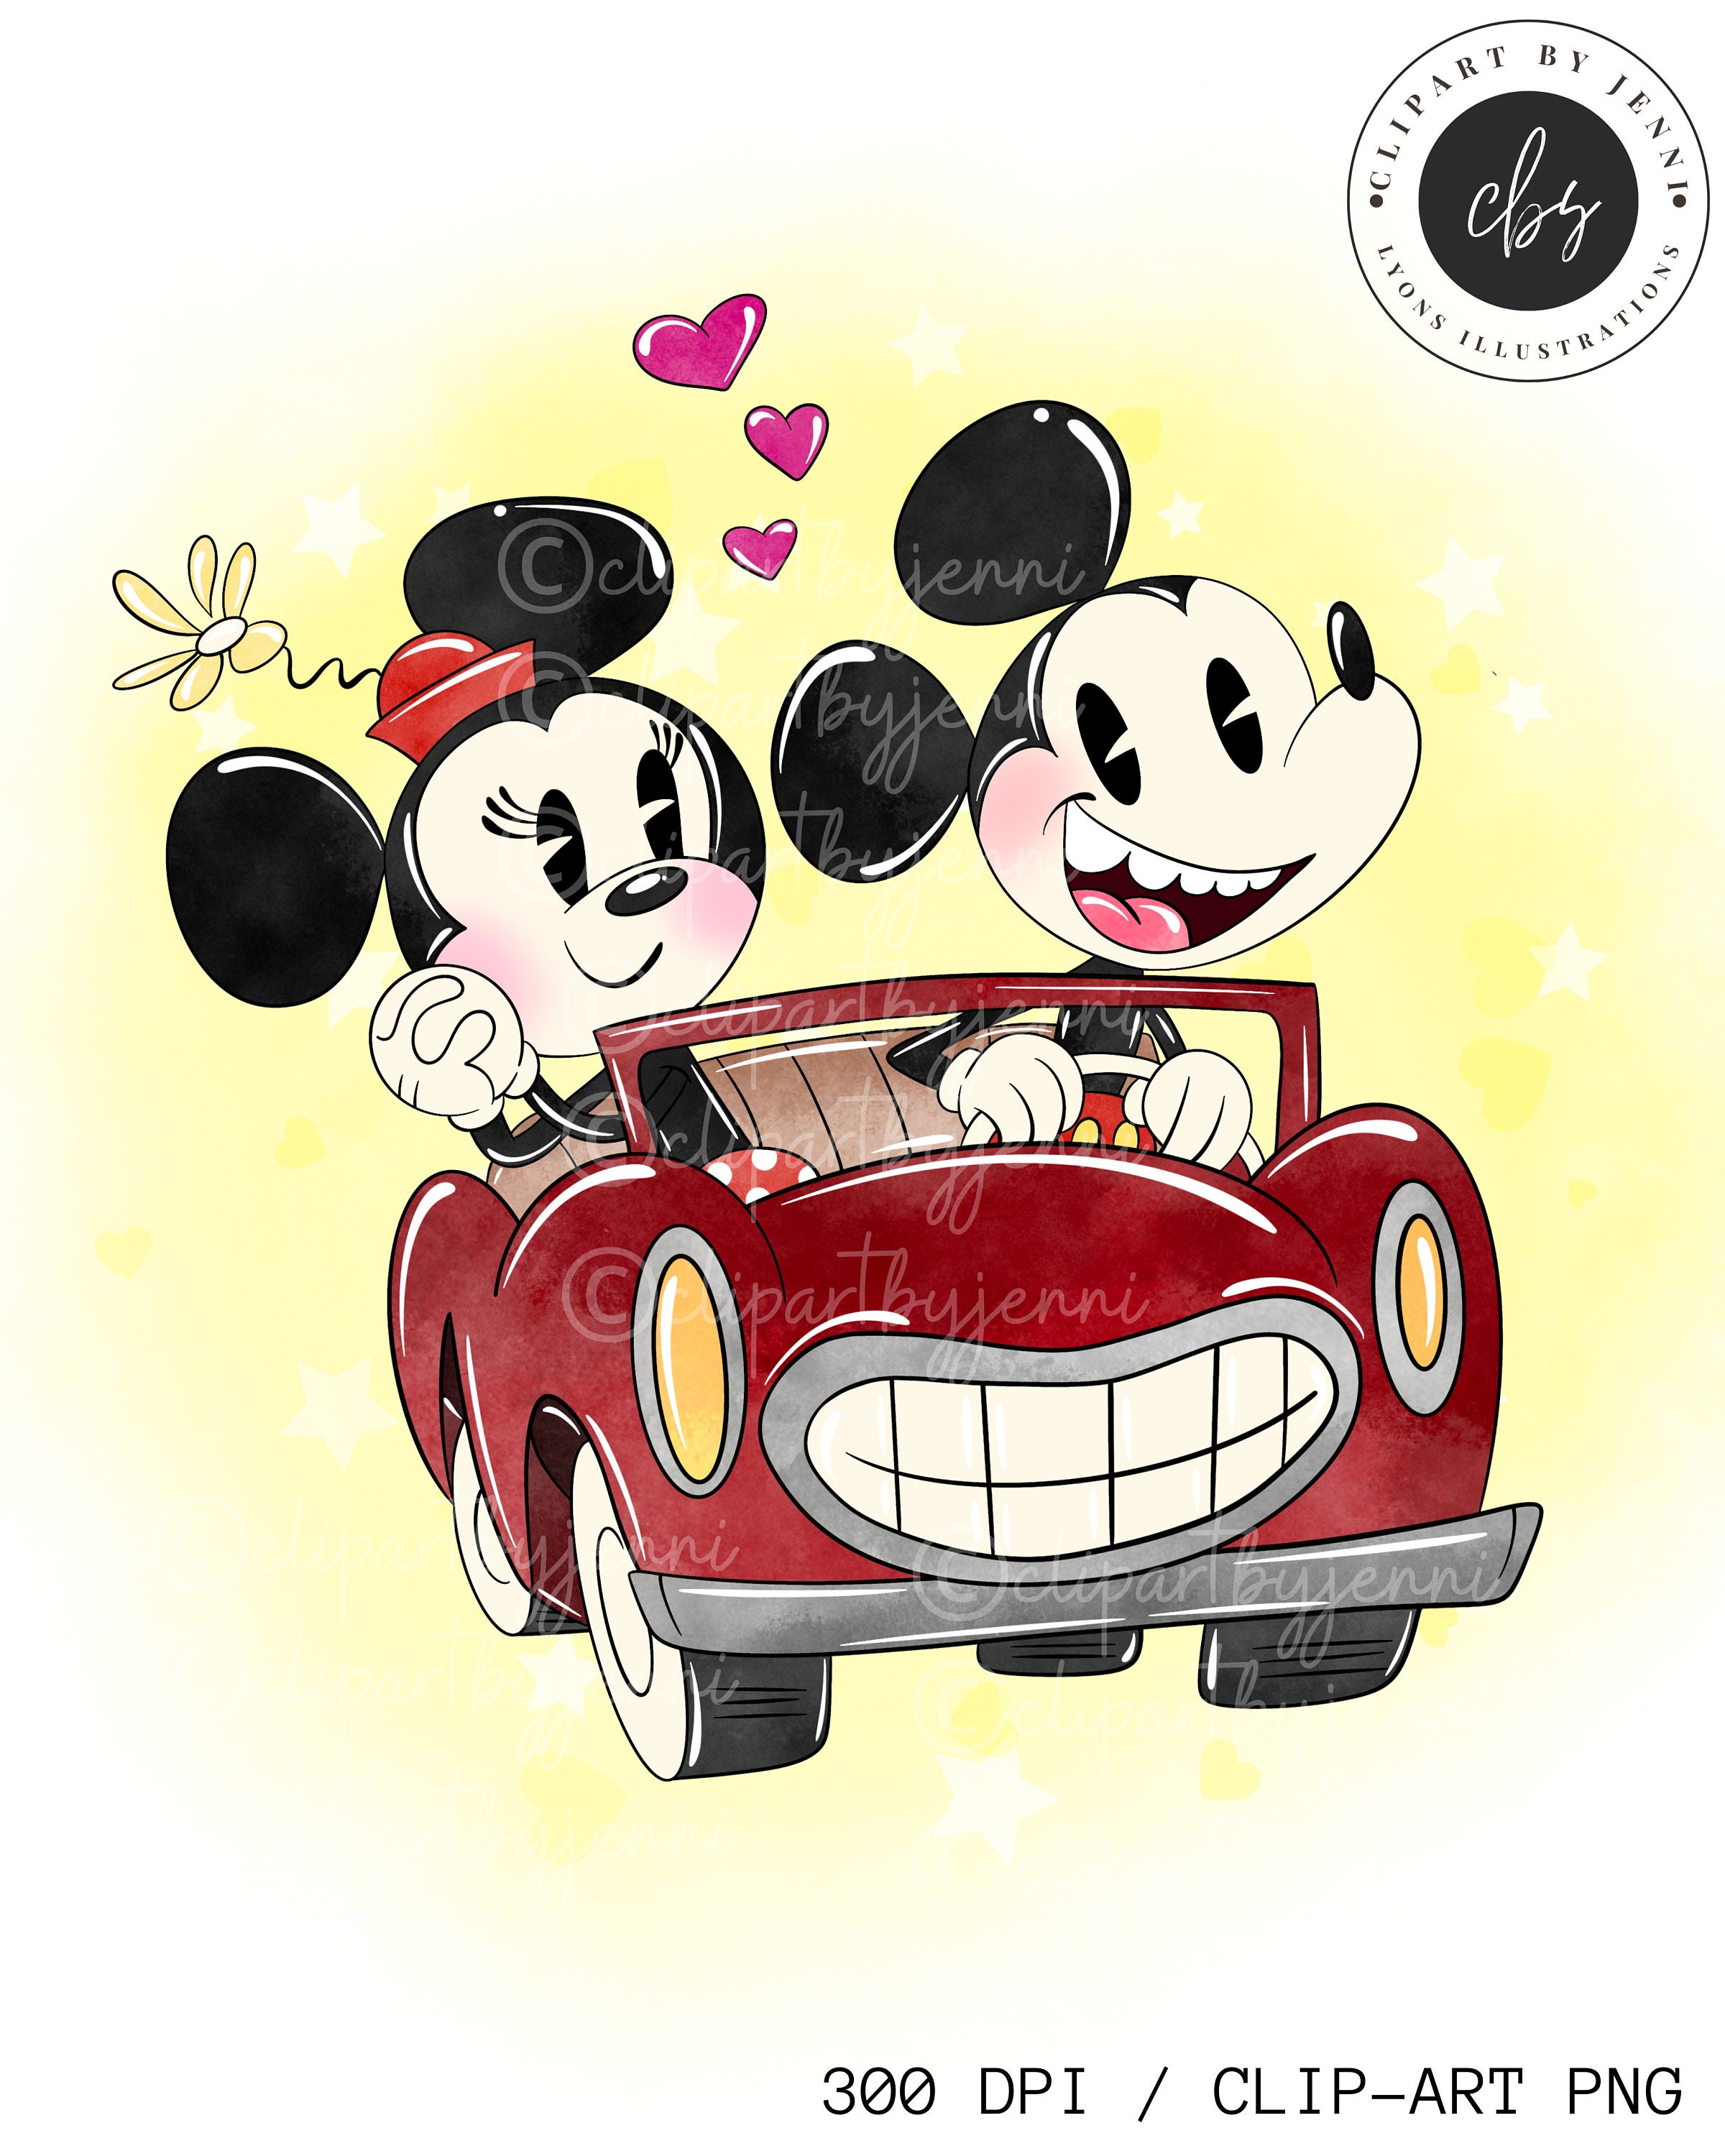 73 Free Minnie Mouse Clip Art - Cliparting.com  Minnie mouse pictures,  Minnie mouse cartoons, Minnie mouse clipart